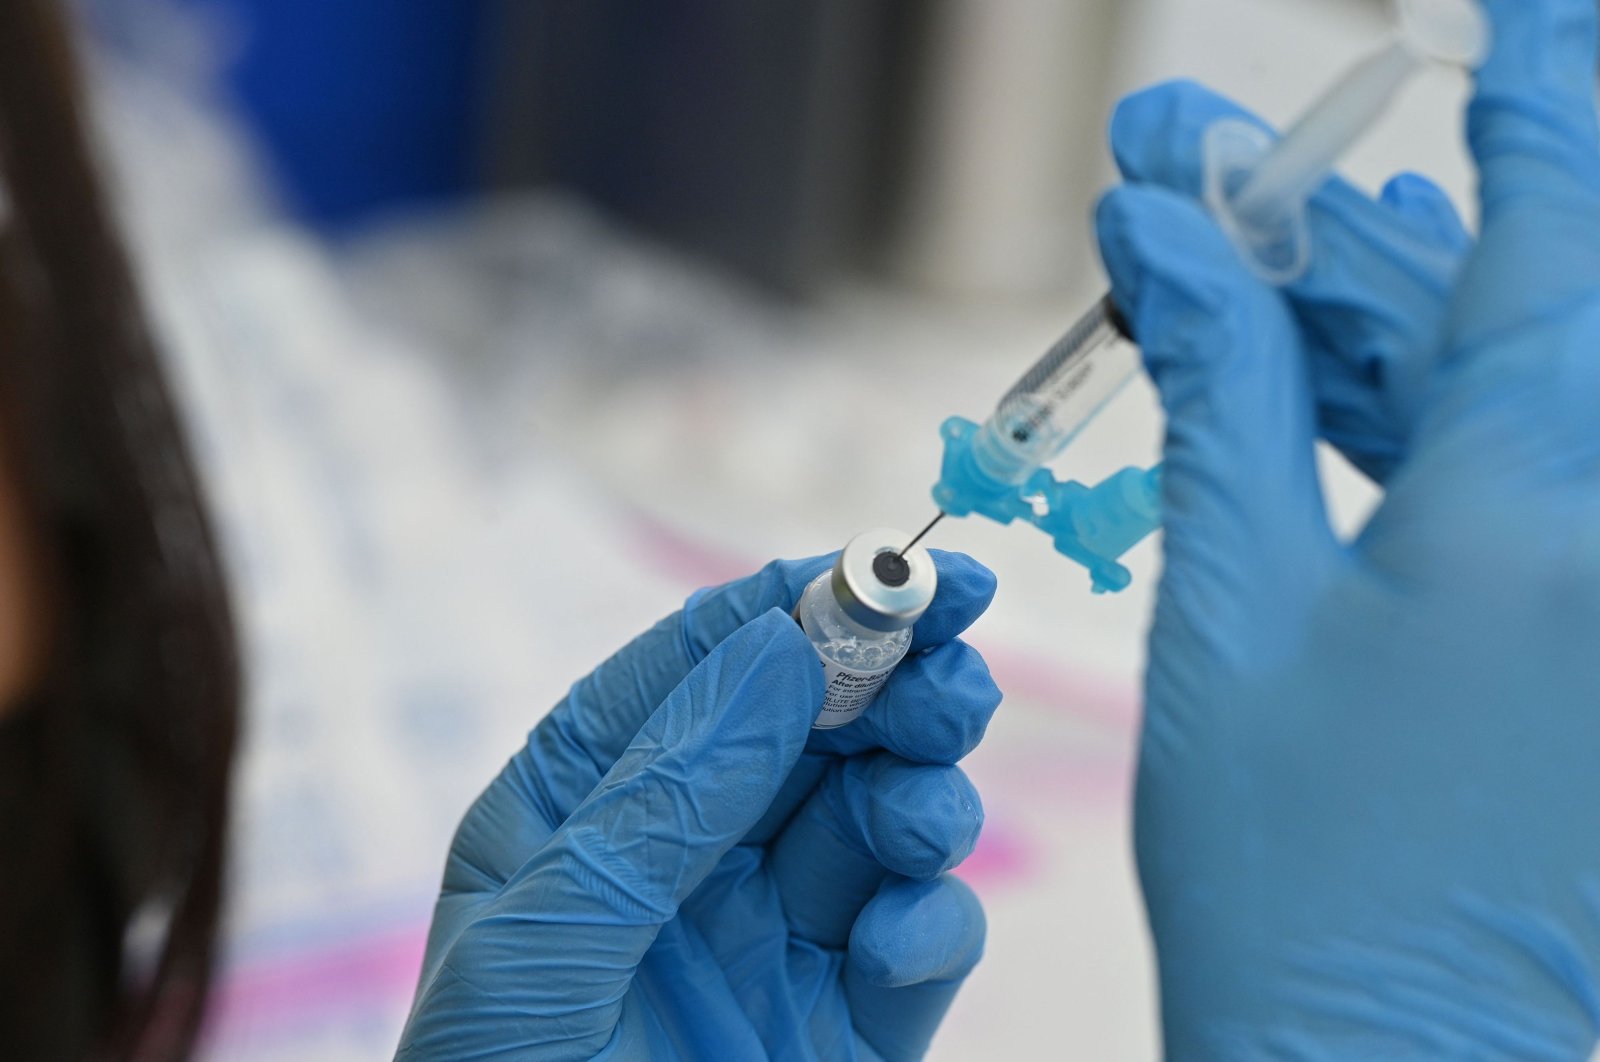 A health care worker fills a syringe with a COVID-19 vaccine at a community vaccination event in Los Angeles, U.S., Aug. 11, 2021. (AFP Photo)